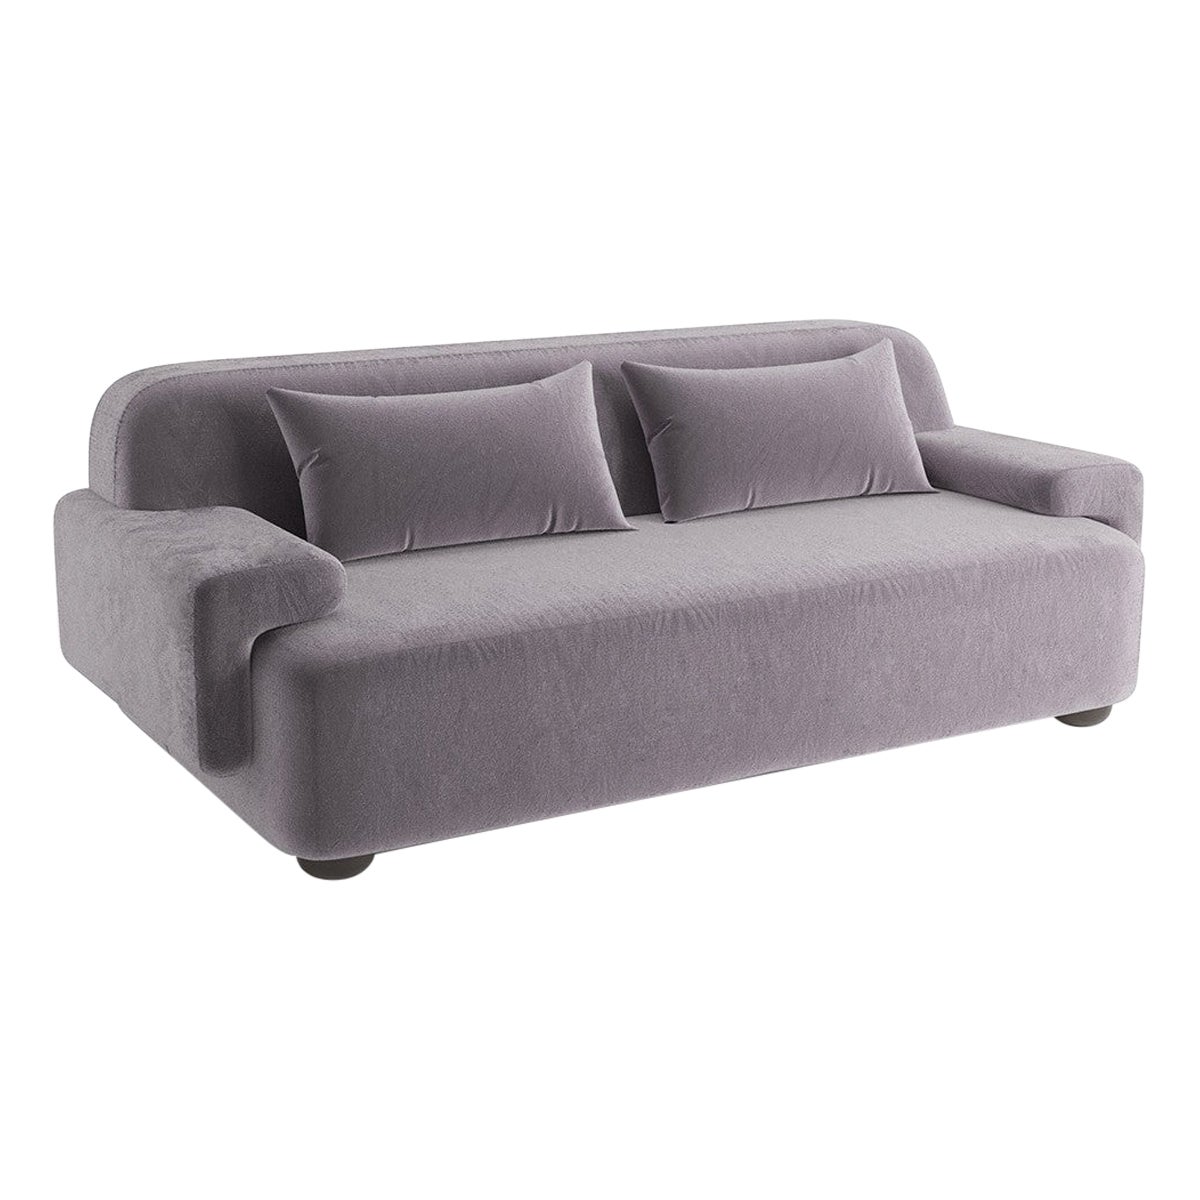 Popus Editions Lena 2.5 Seater Sofa in Gray Verone Velvet Upholstery For Sale